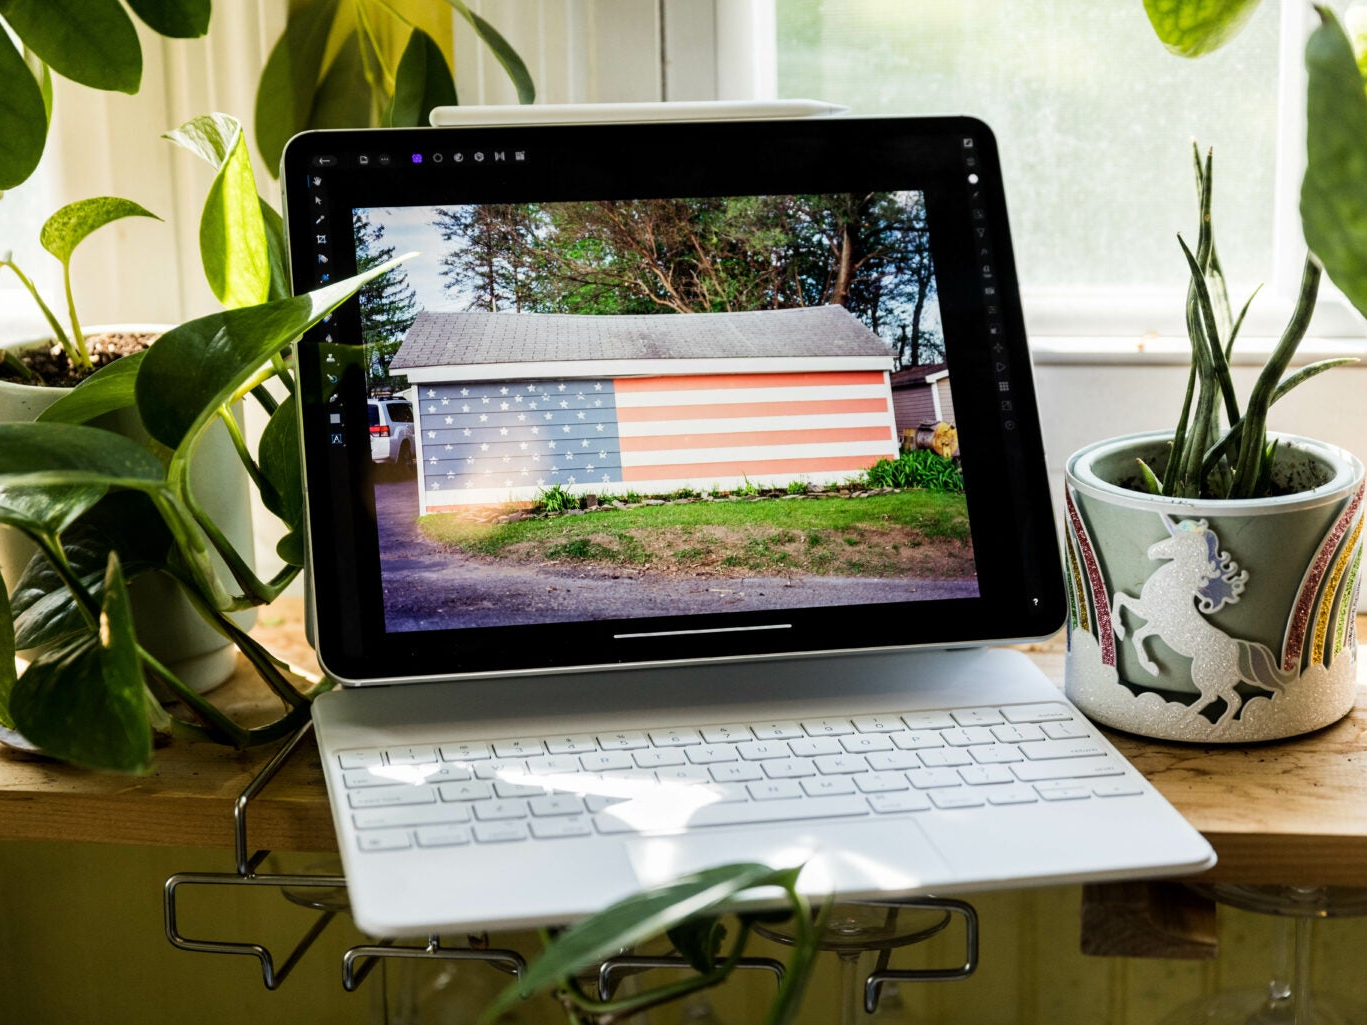 An iPad Pro with a keyboard, on a windowsill surrounded by plants and bathed in sunlight.